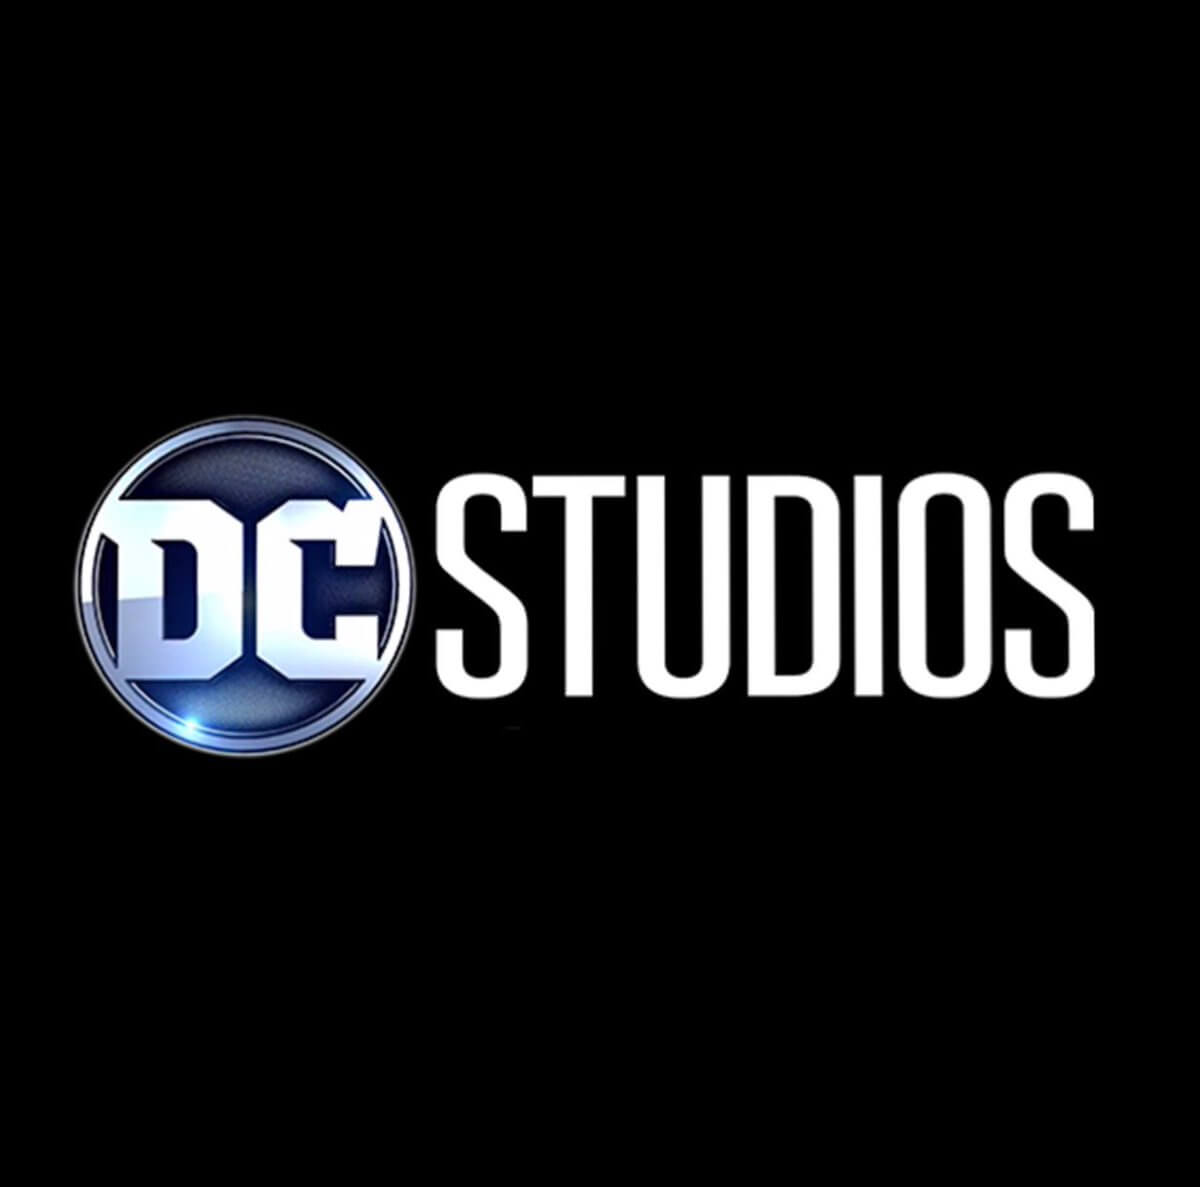 Warner Bros DC Studios to be headed up by James Gunn and Peter Safran